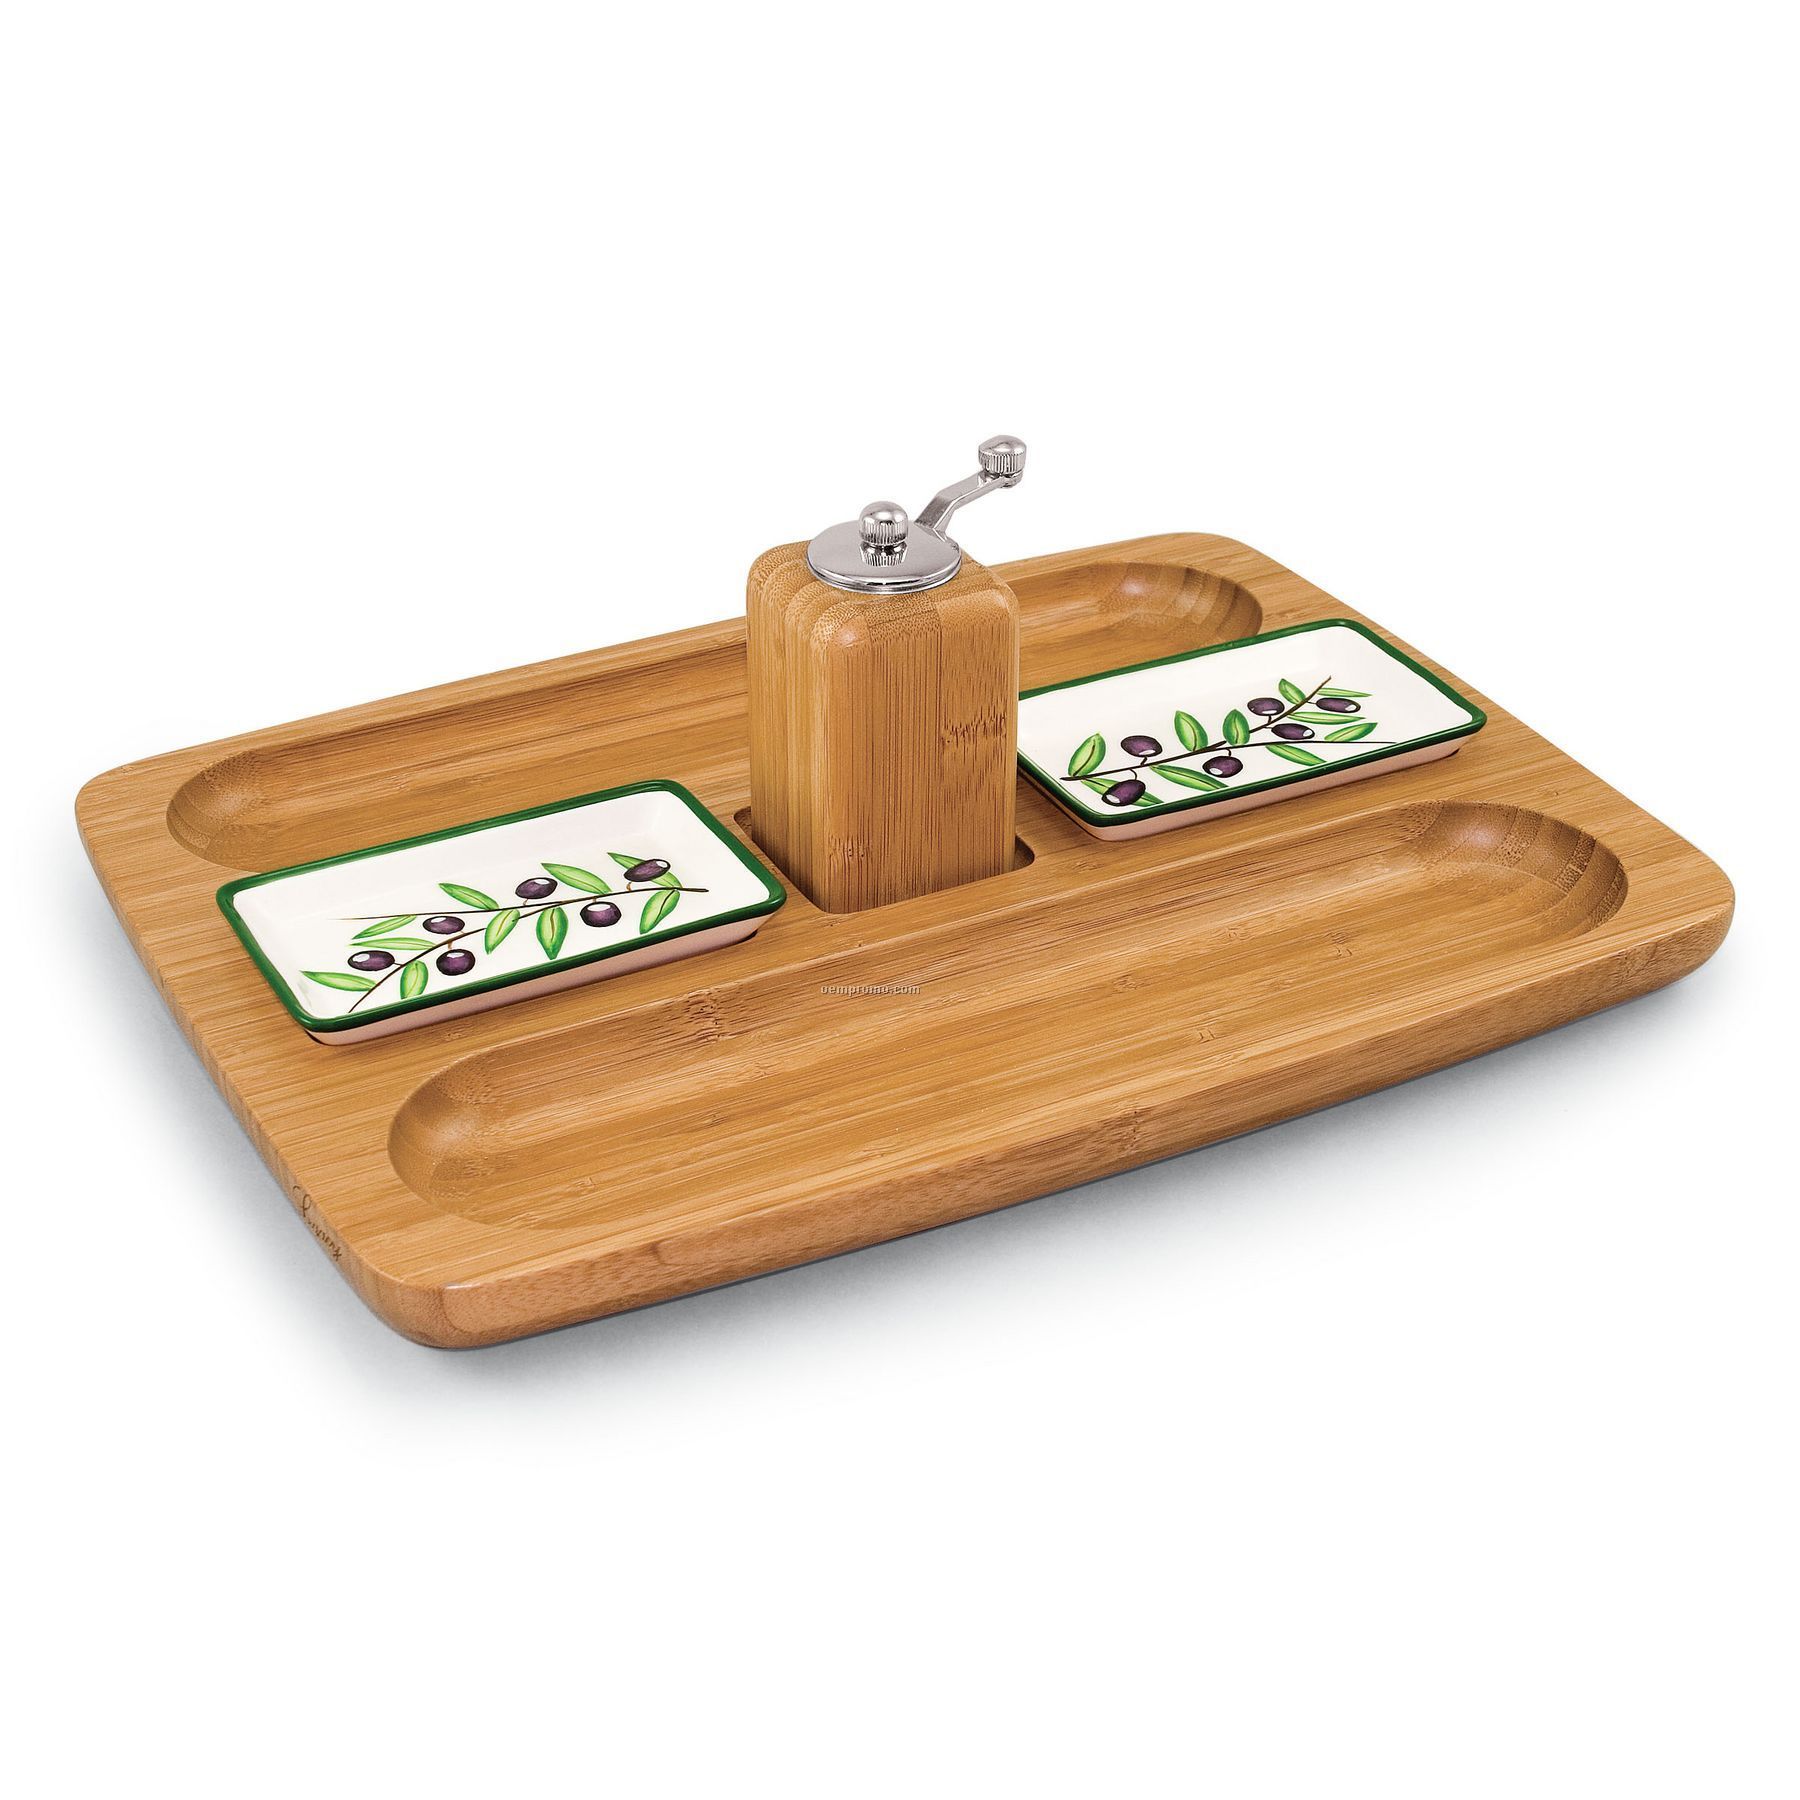 Tuscano Rectangular Bamboo Serving Tray W/ 2 Ceramic Dishes & Pepper Mill